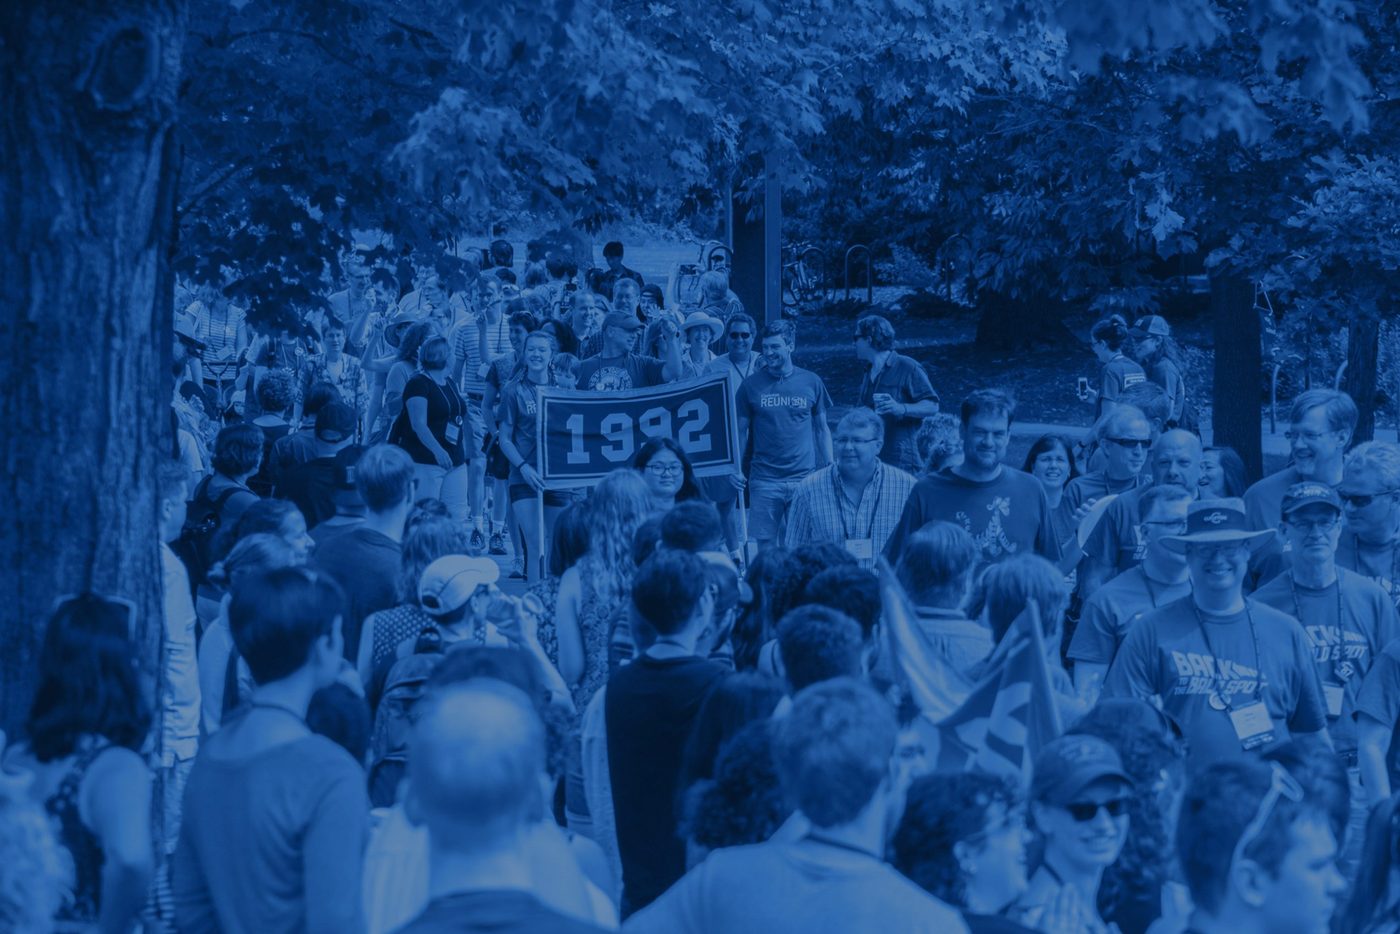 Reunion Parade of Classes, with a blue filter applied to the image